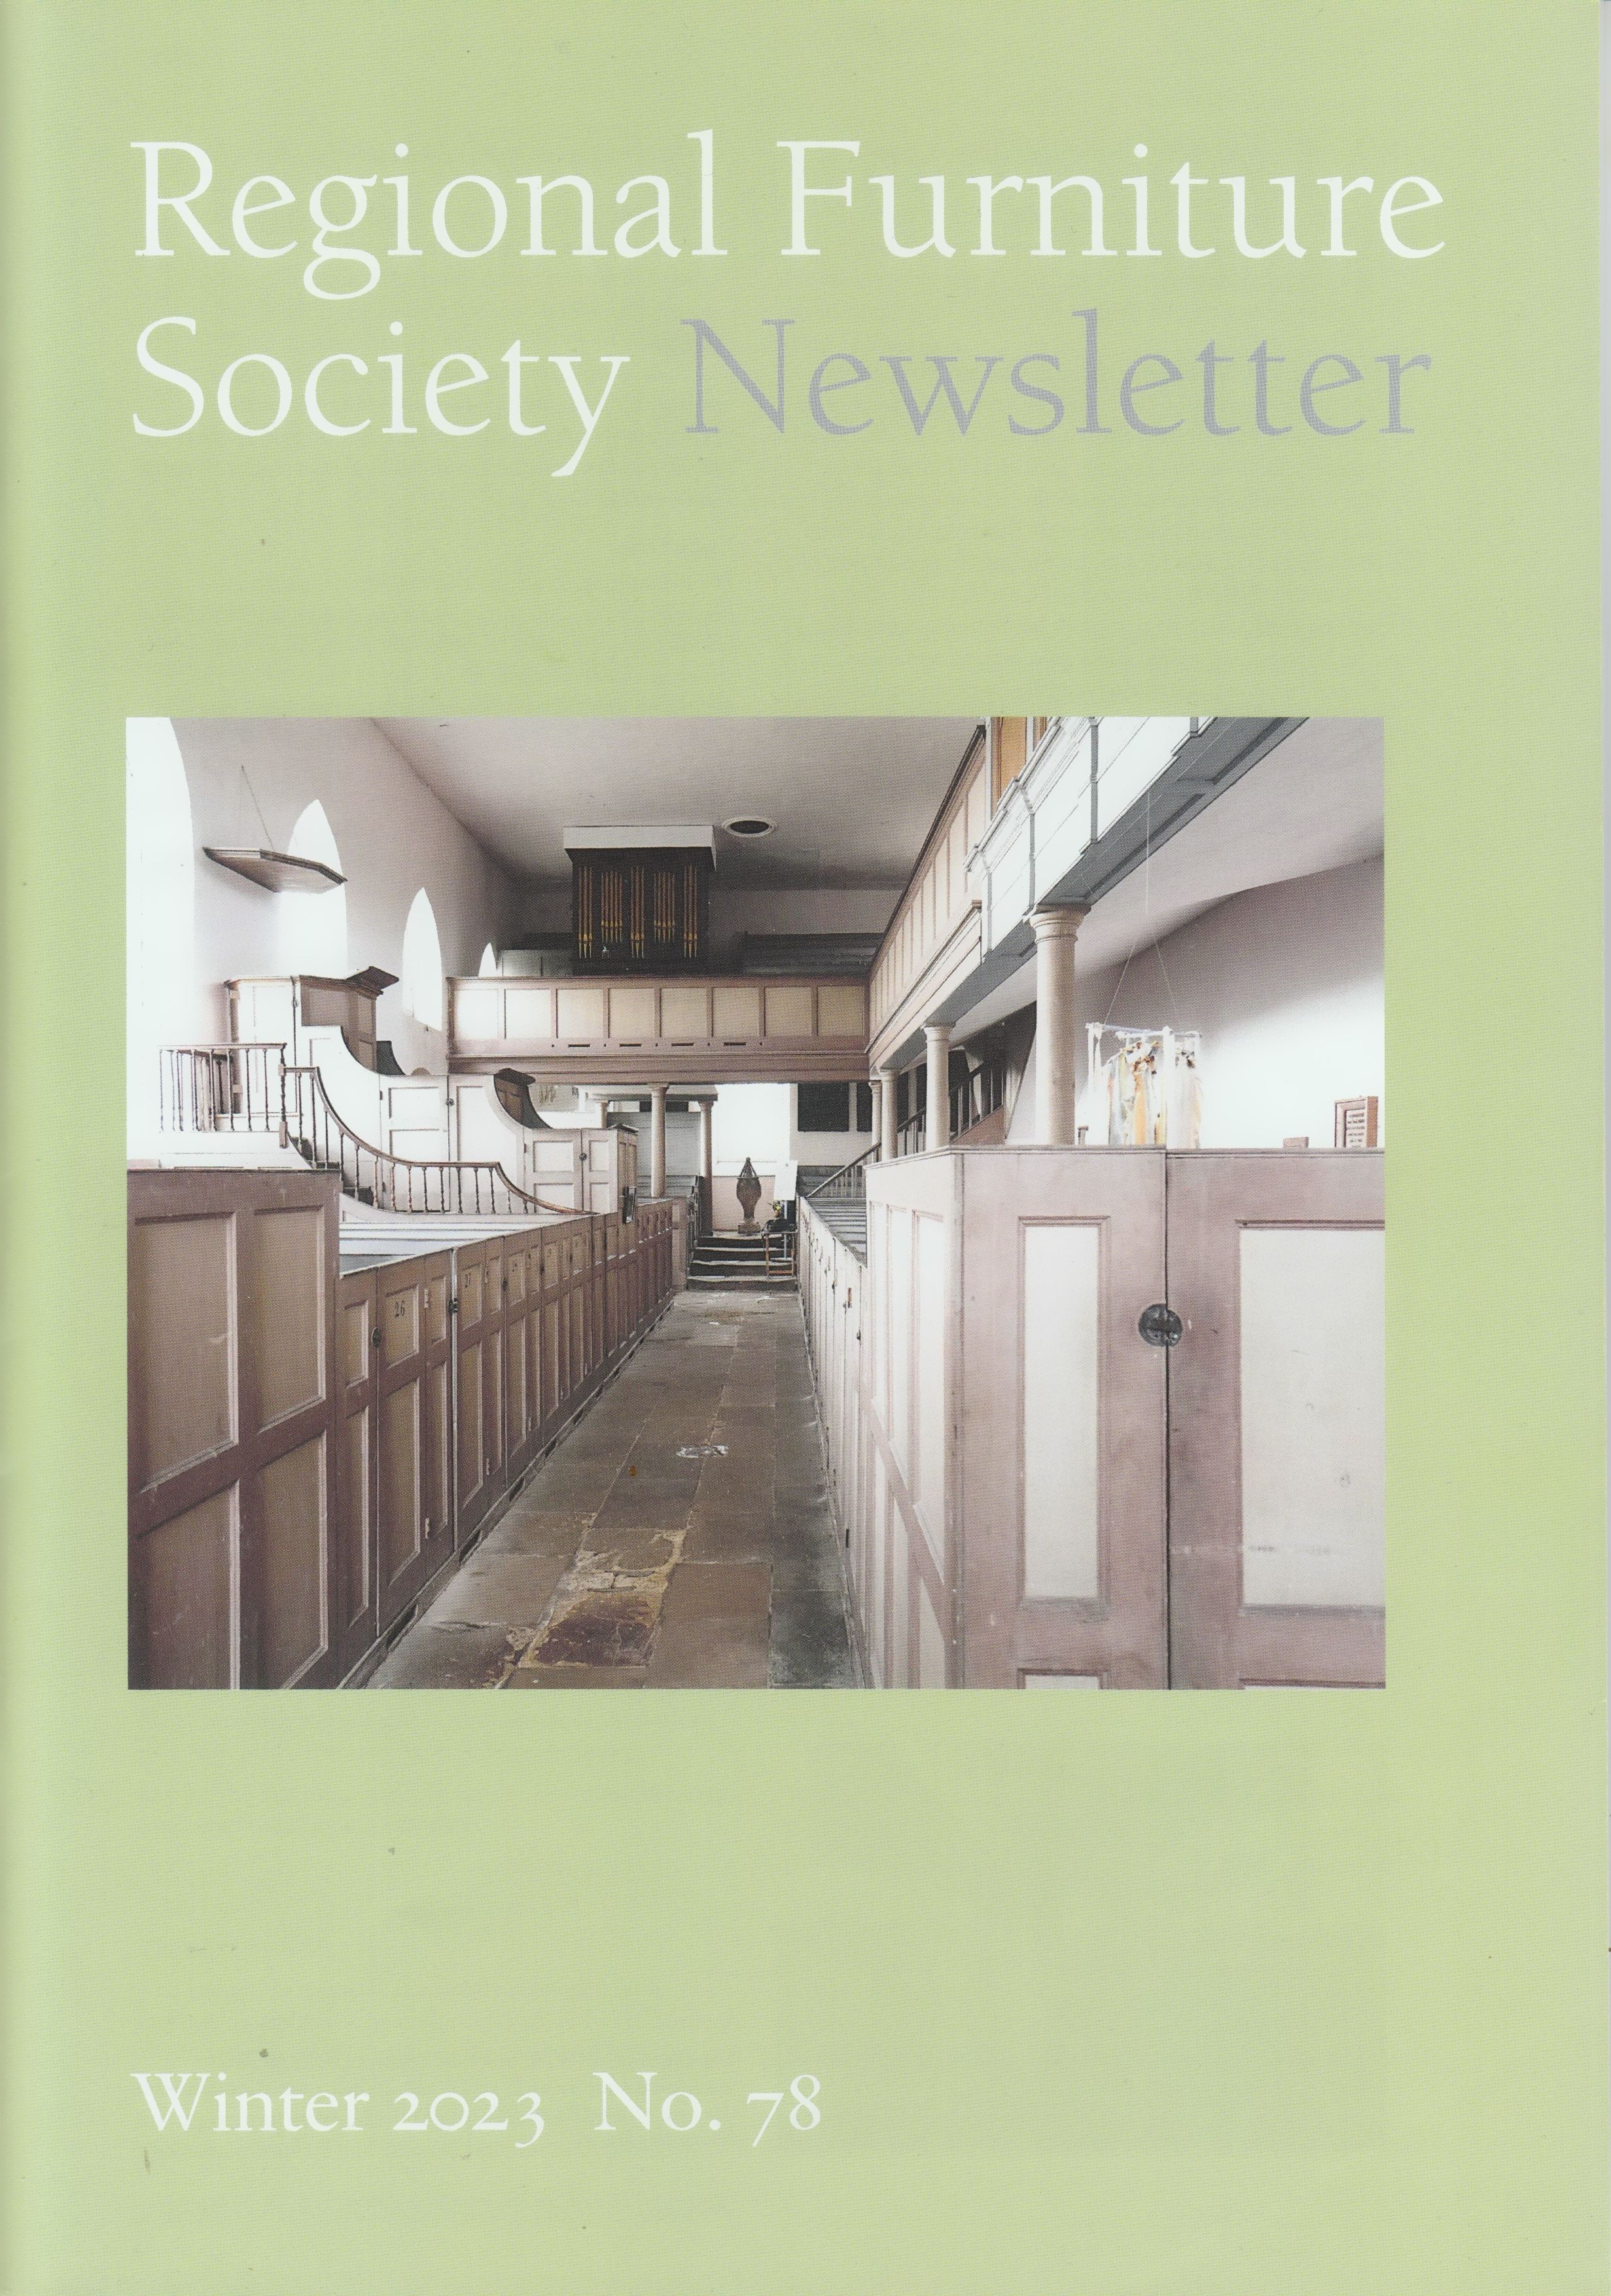 Newsletter Research Articles | Furniture Regional Society